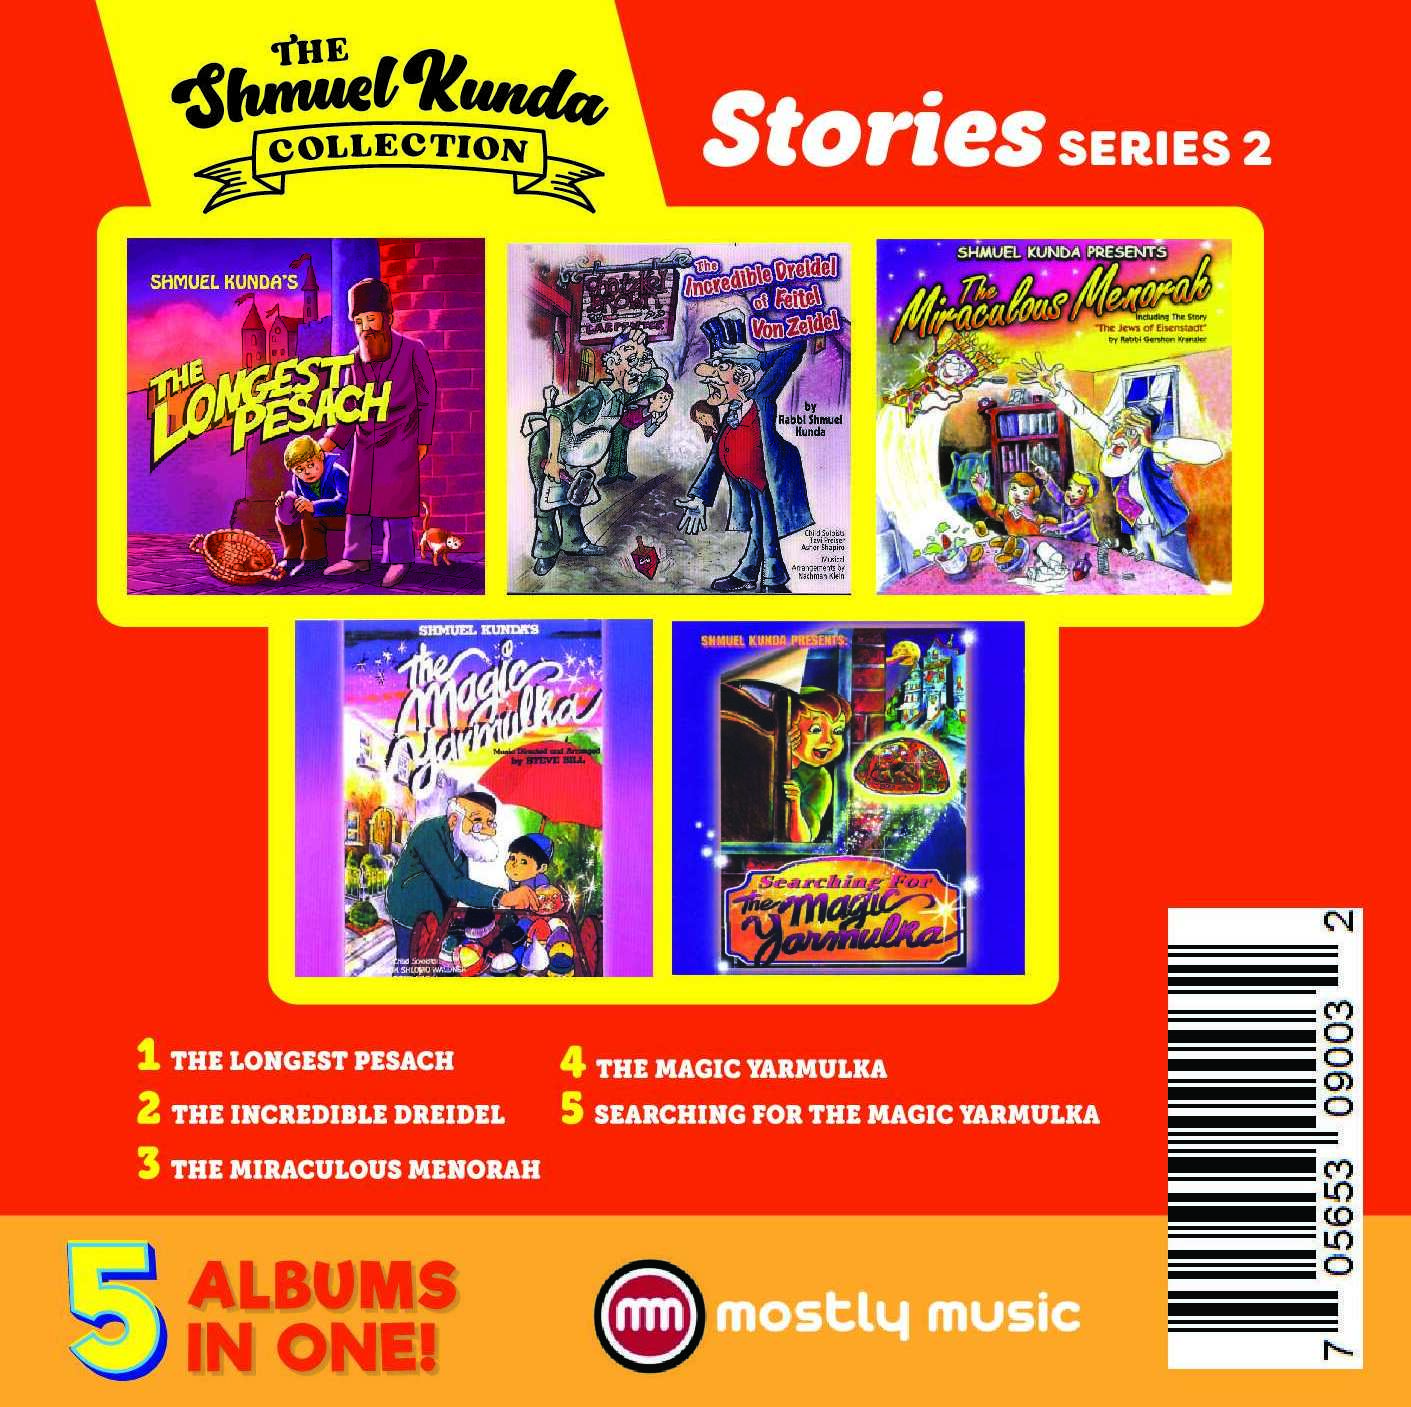 The Shmuel Kunda Collection 4 - Stories Series 2 (USB)